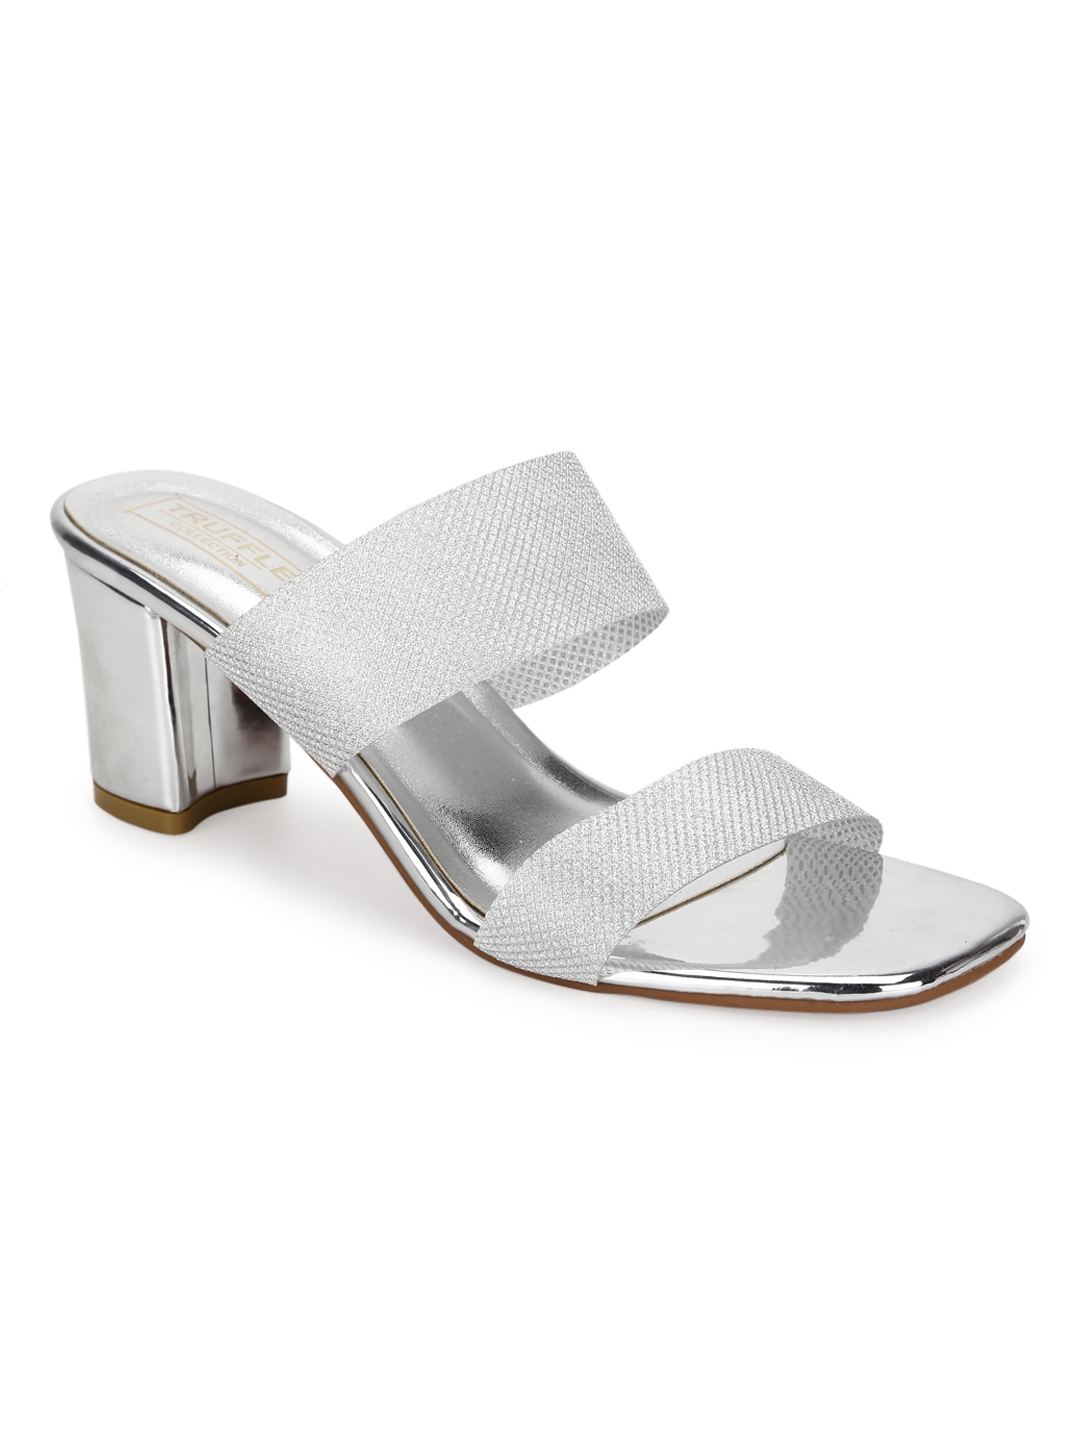 Truffle Collection | Silver PU Block Heels Mules